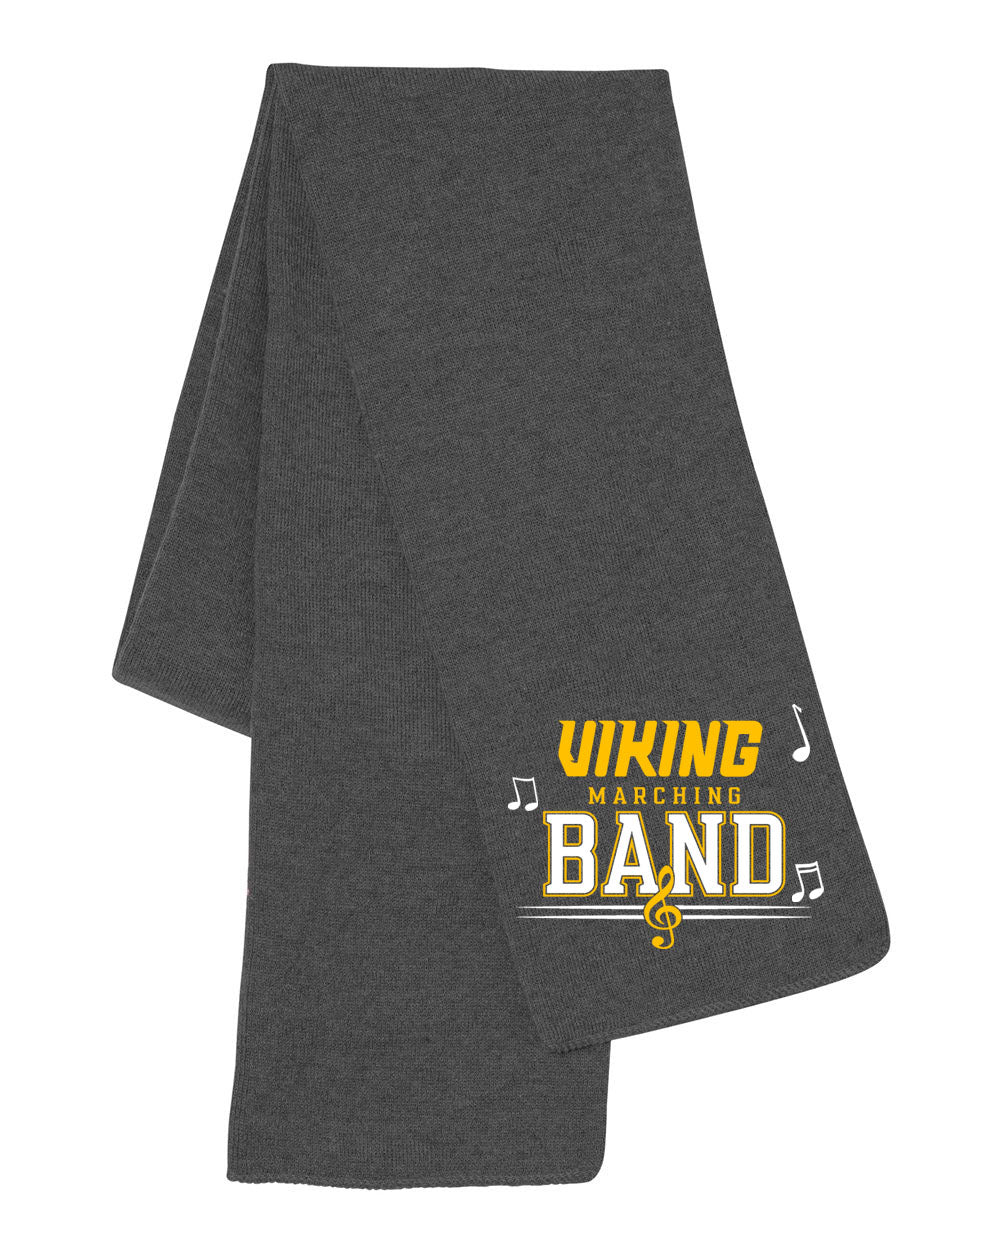 Vernon Marching Band design 5 Scarf